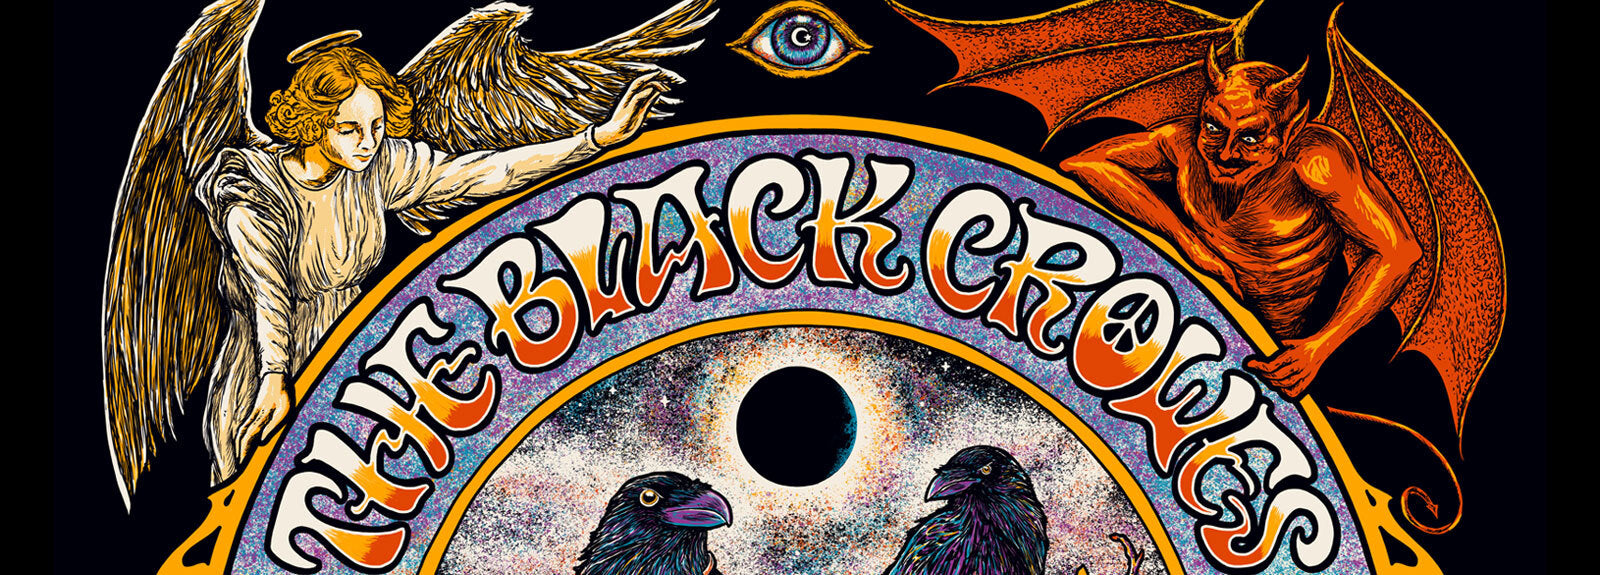 The Black Crowes The Southern Harmony And Musical Companion